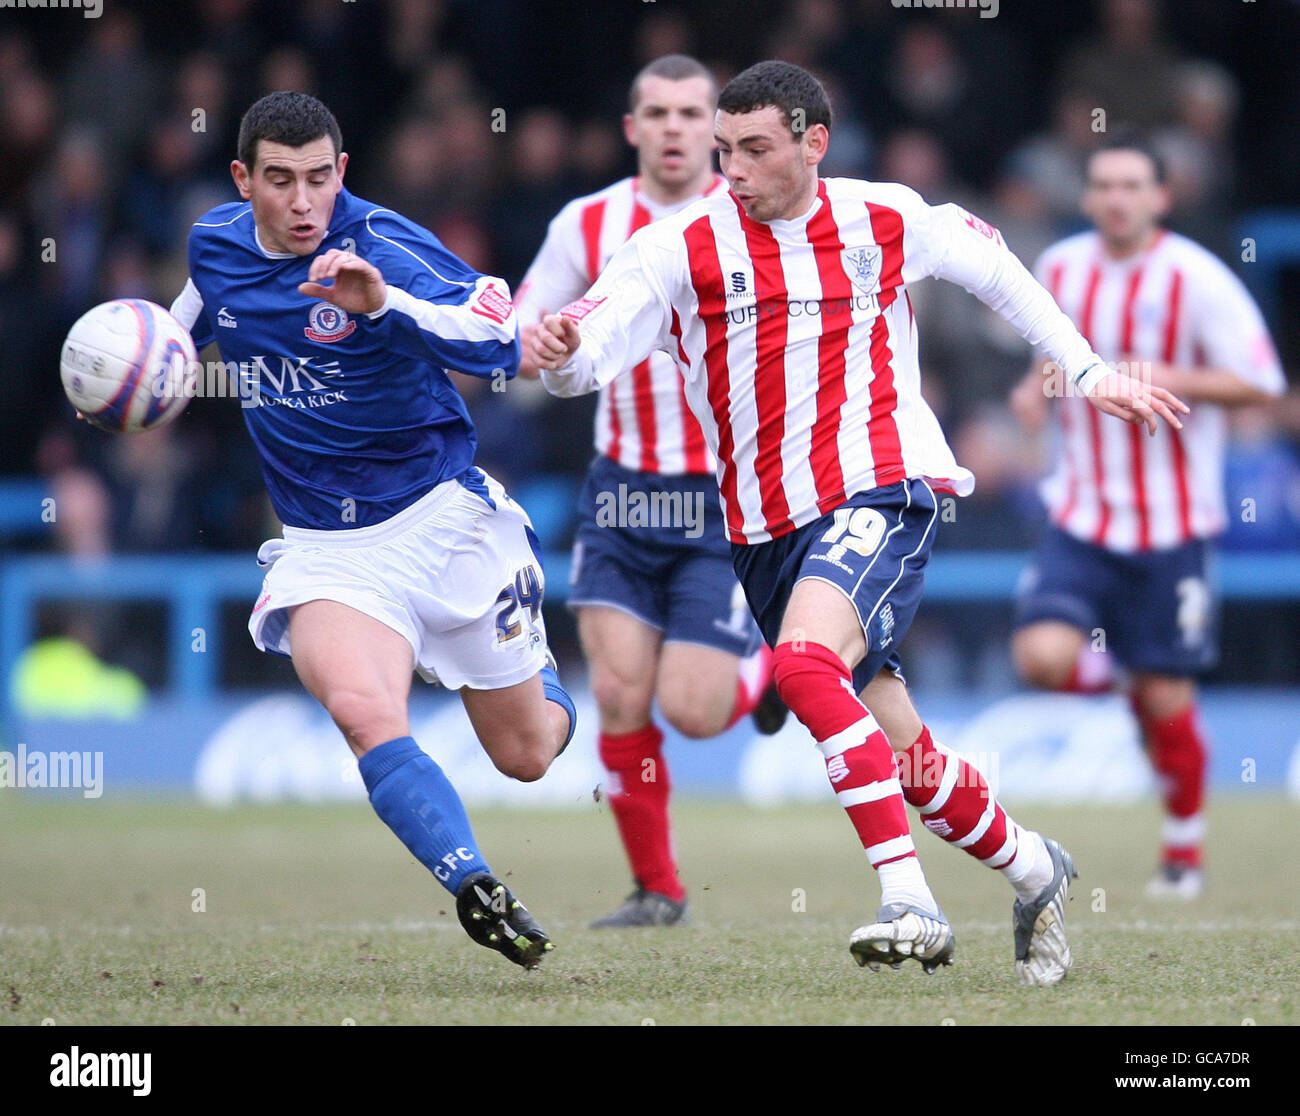 Chesterfield's Adam Rundle and Bury's David Worrall battle for the ball during the Coca-Cola League Two match at the Recreation Ground, Chesterfield. Stock Photo